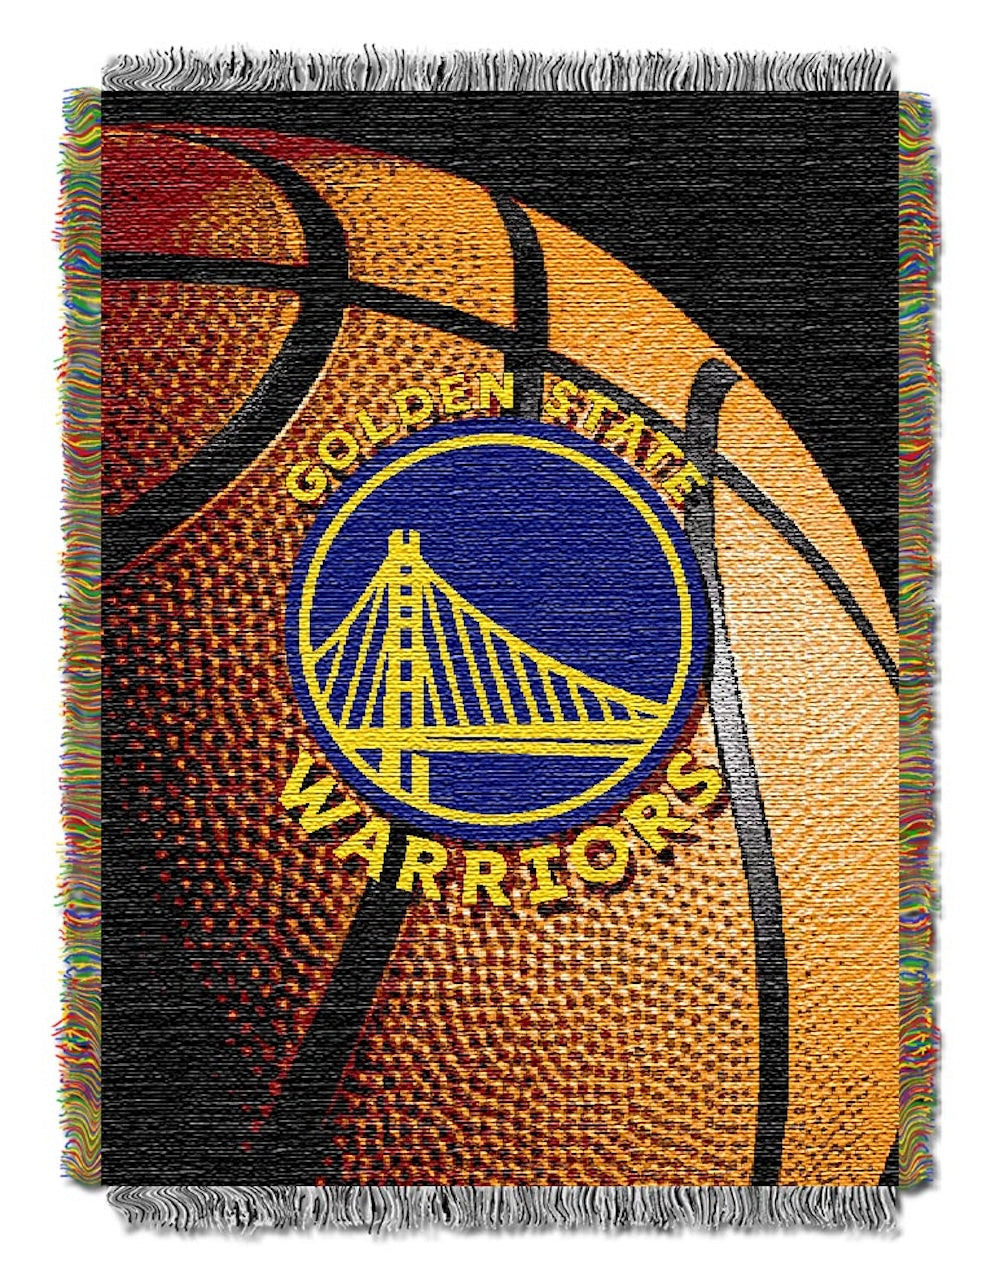 Golden State Warriors woven photo tapestry